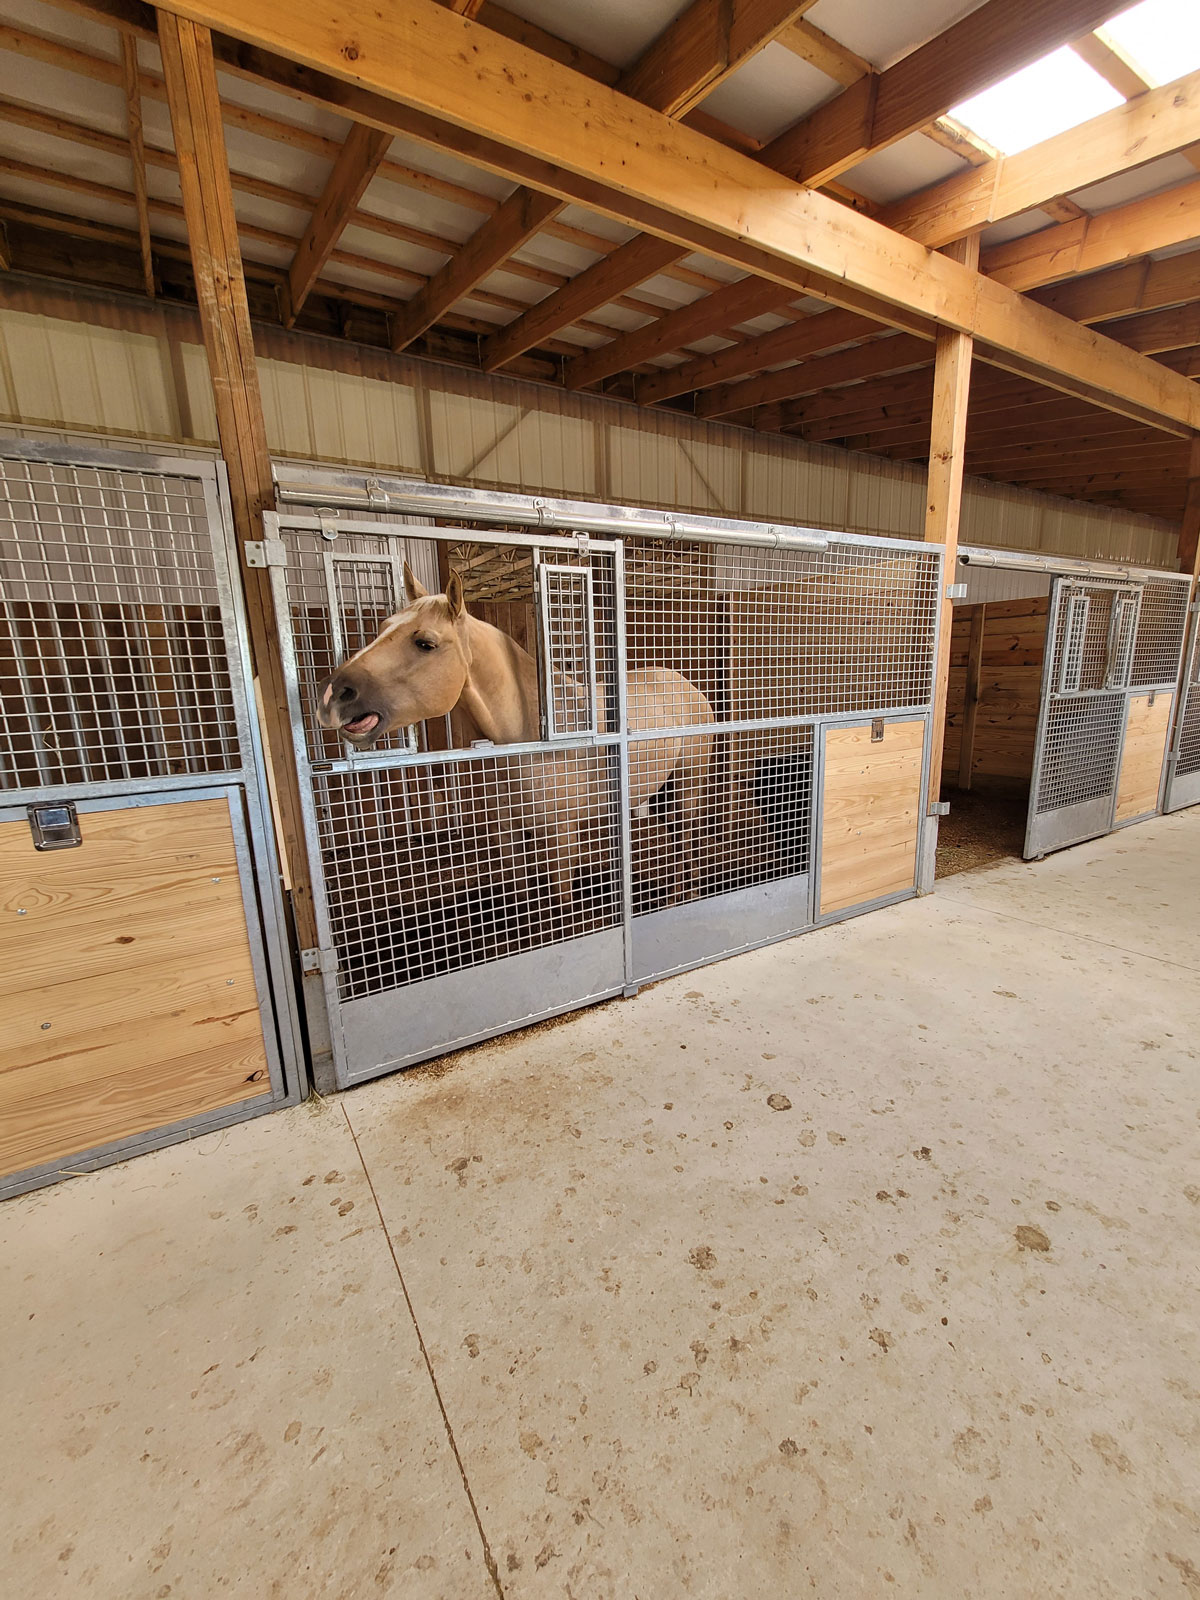 Horse stall with a mesh front, with a horse inside sticking his head out